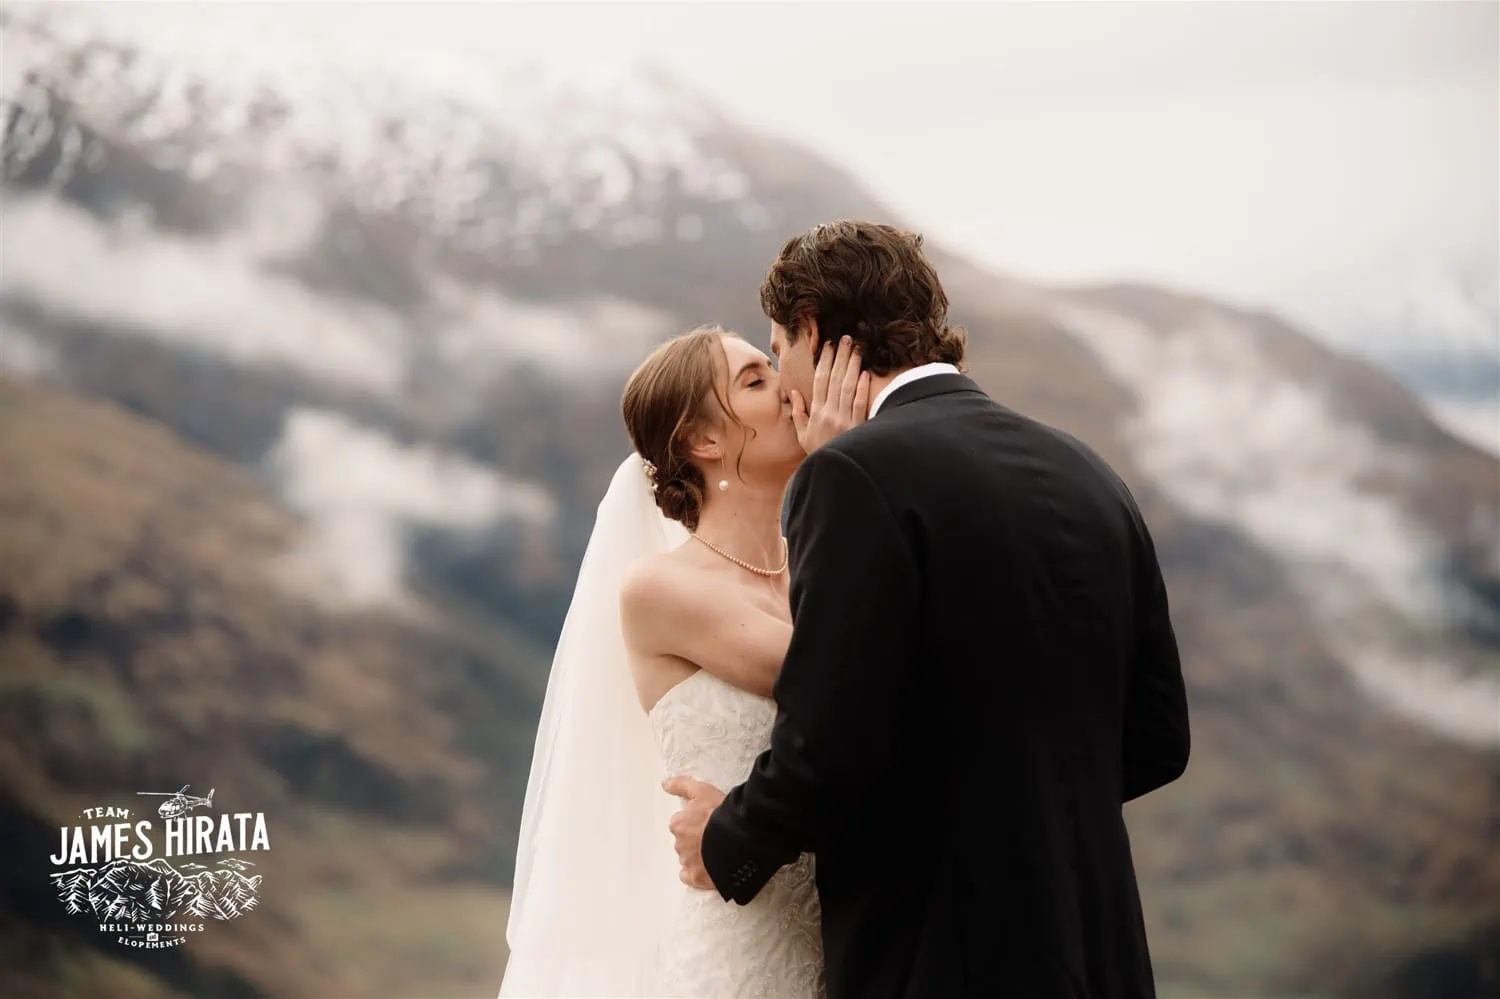 Hannah and Ross, an elopement wedding couple, sharing a kiss with Queenstown's mountains as their backdrop.